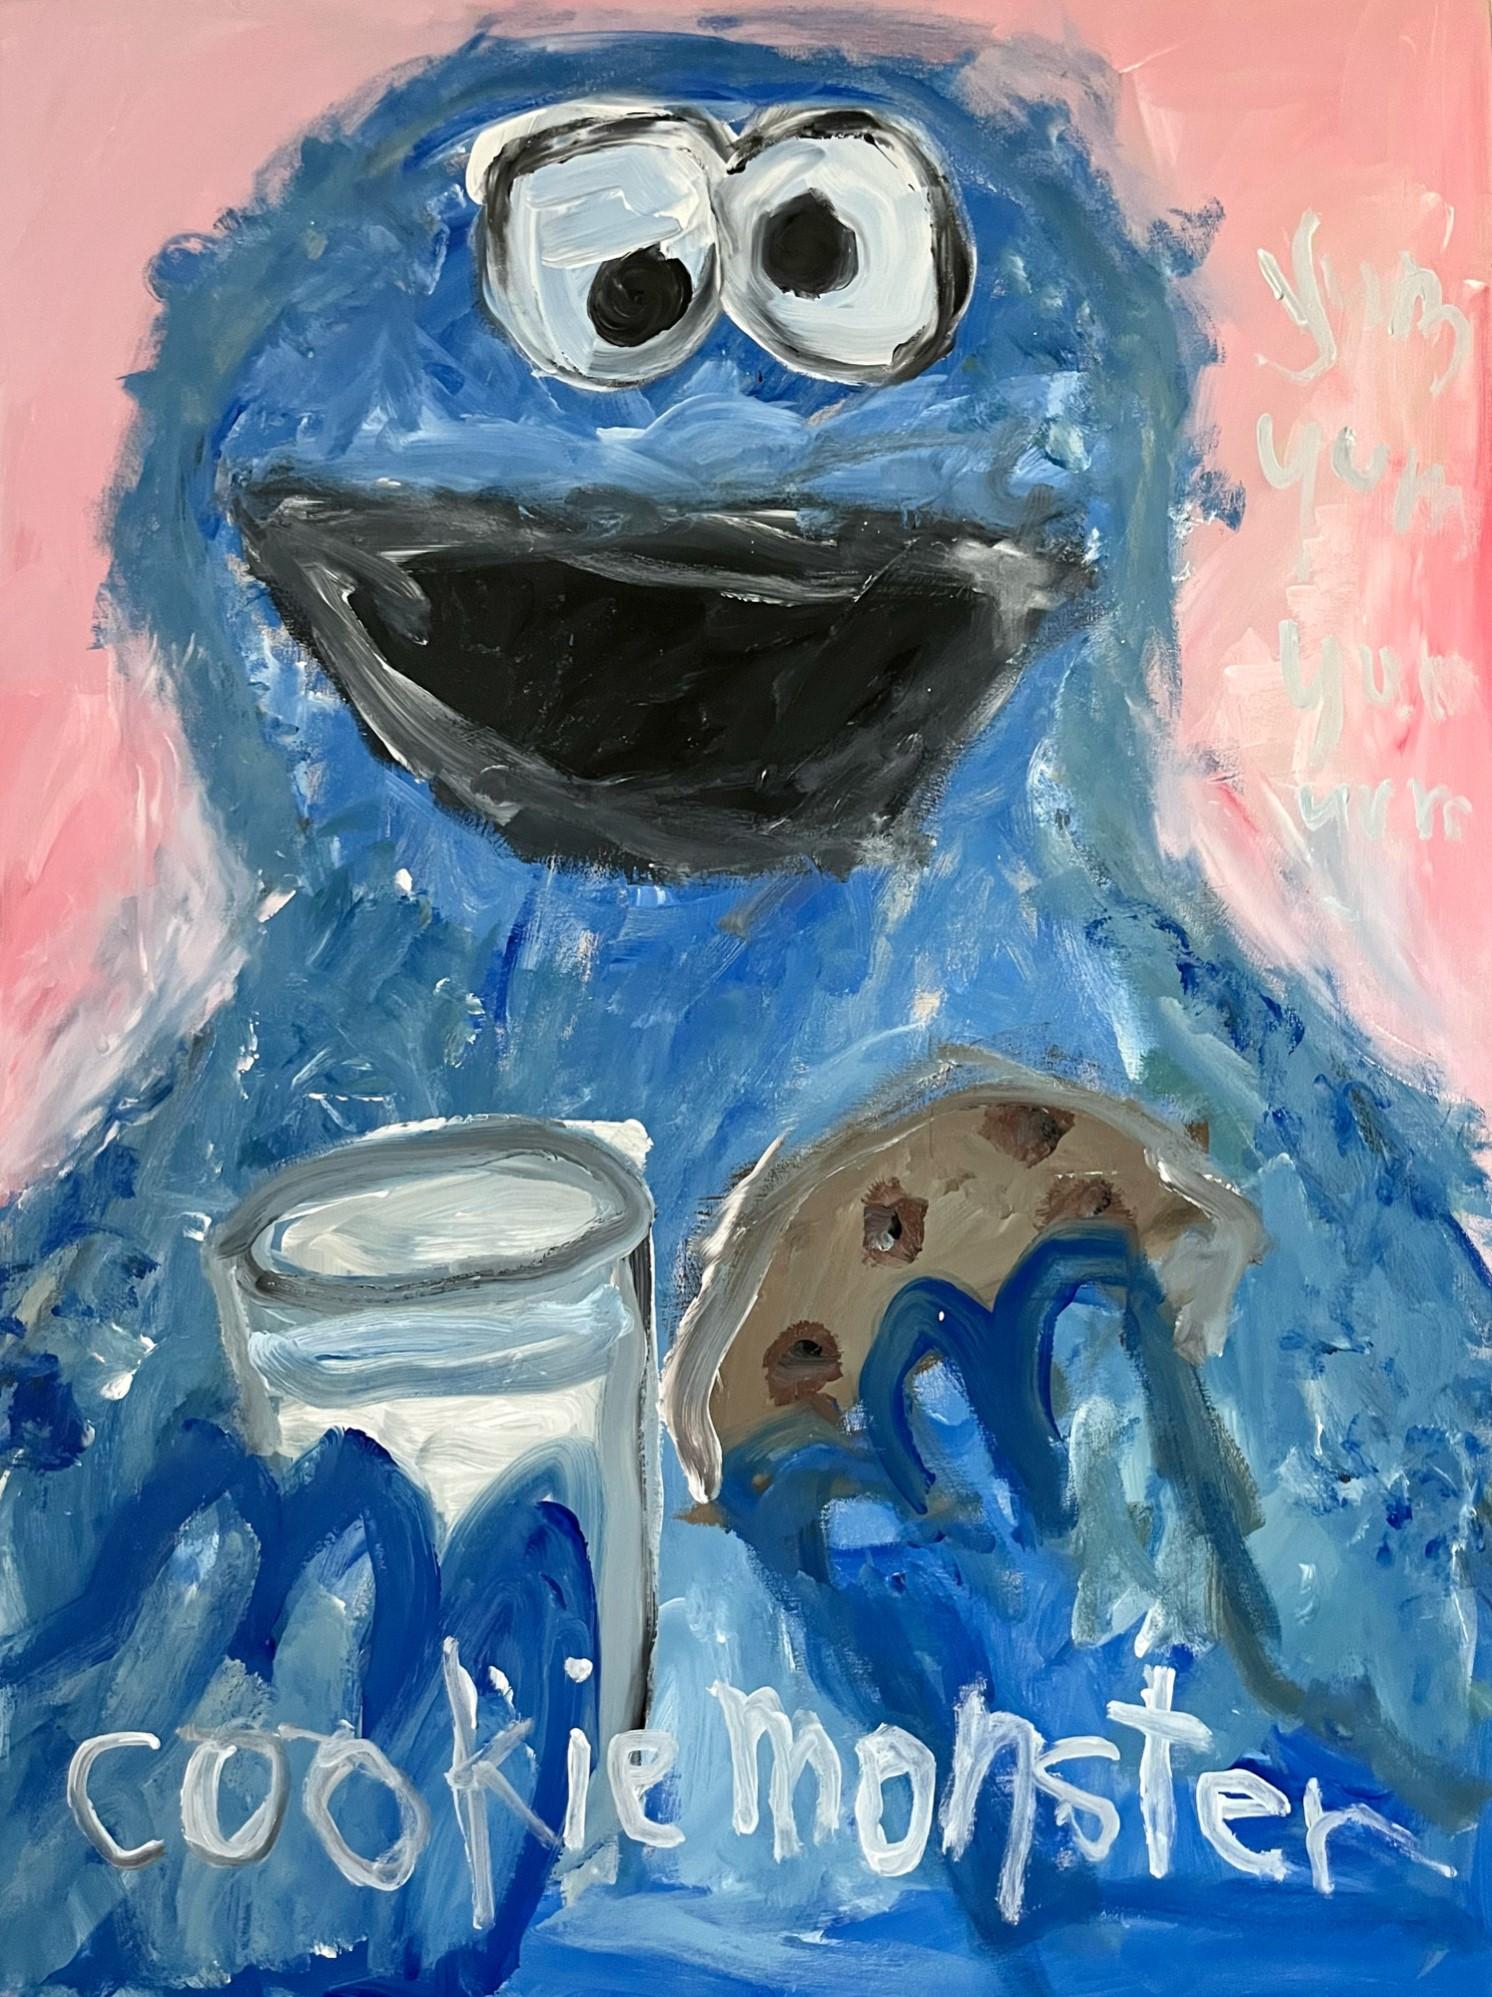 Tyler Casey Abstract Painting - "Cookie Monster" Contemporary Abstract Pop Art Sesame Street Figure Painting